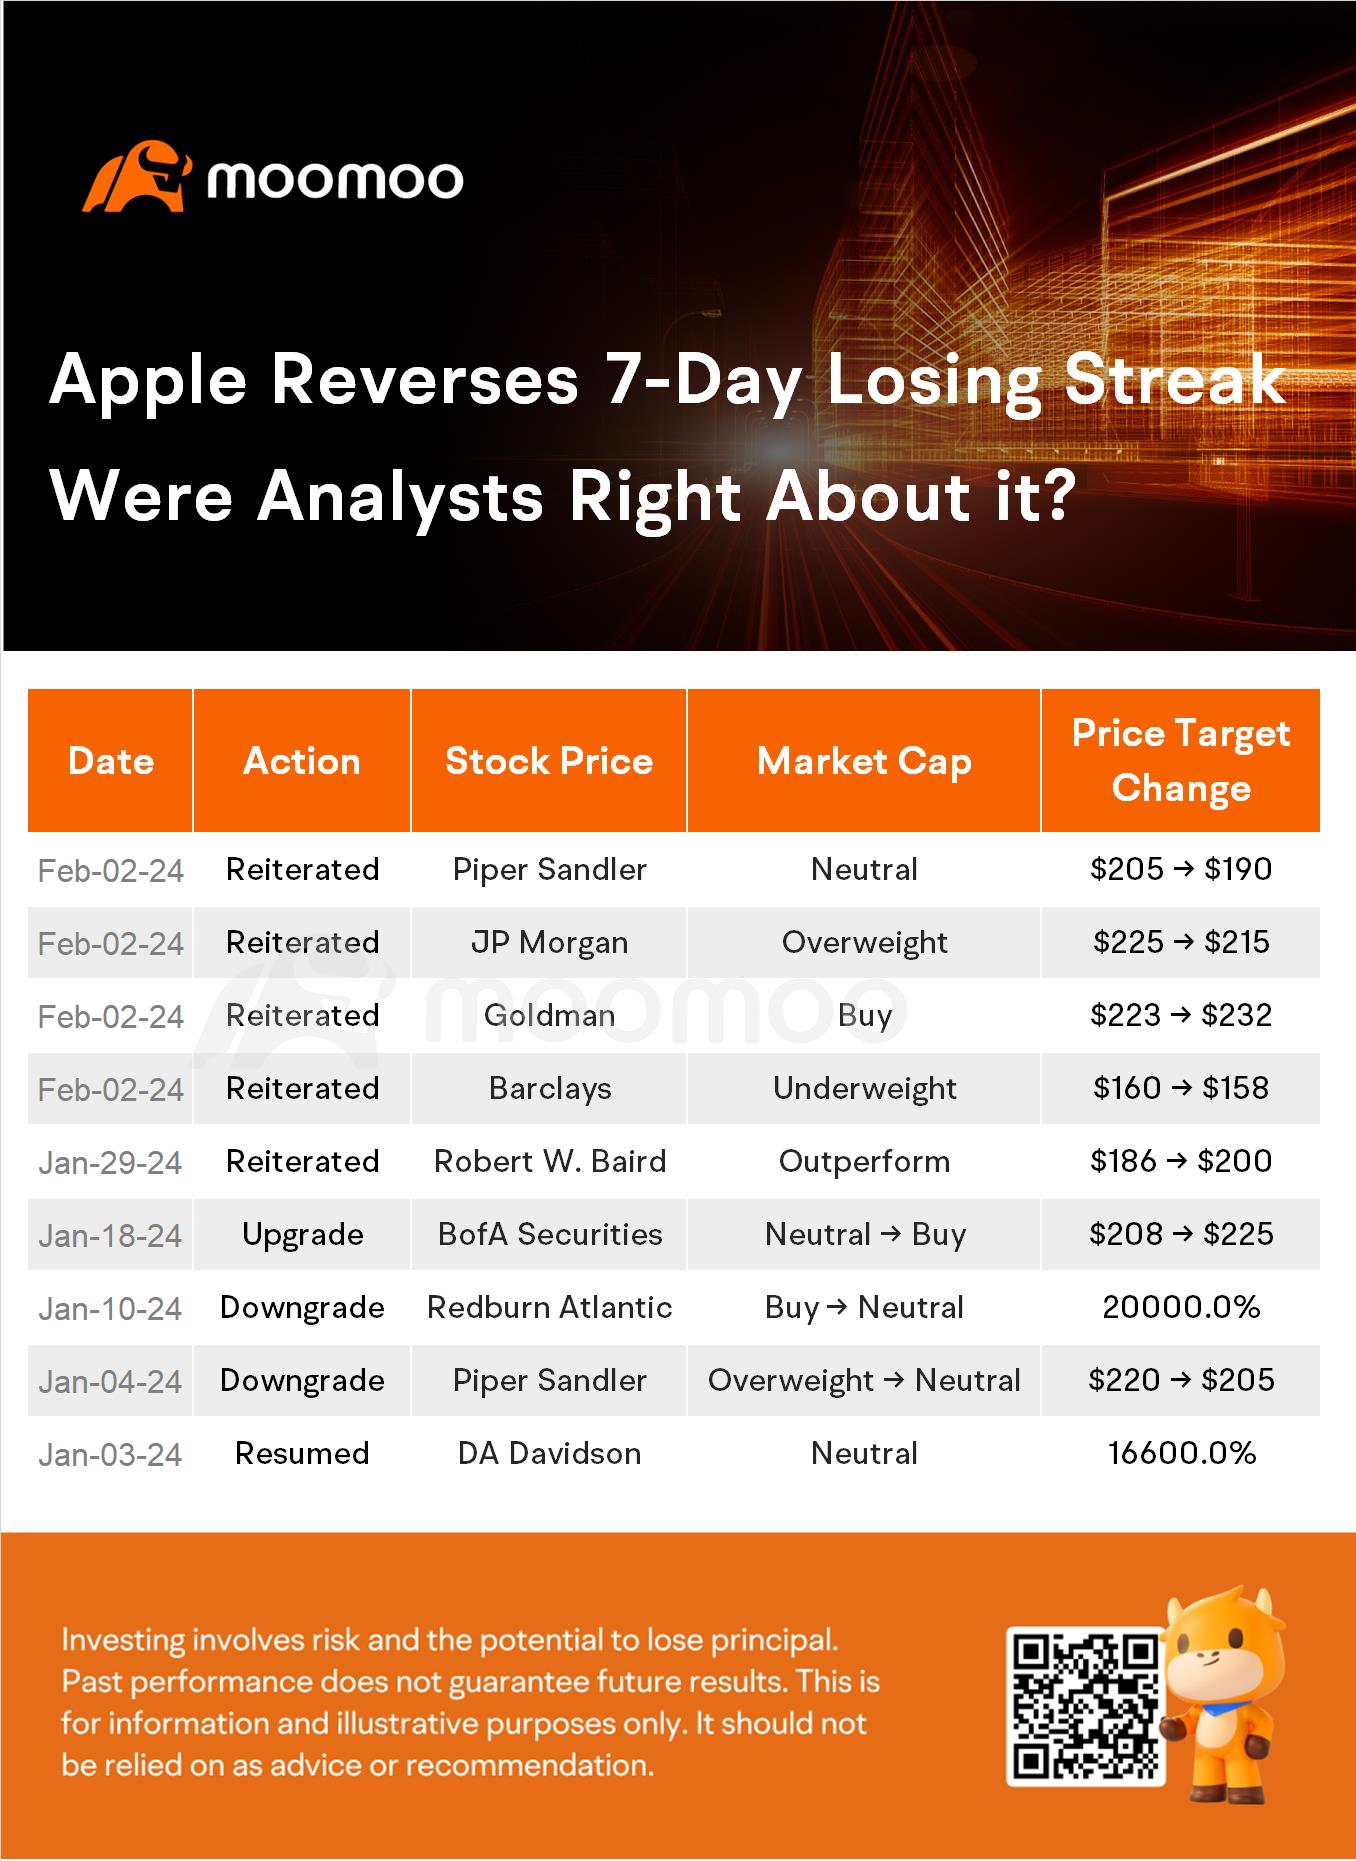 Apple Stock Finally Ends Its Losing Streak. Here's What Analysts Think Will Happen Next